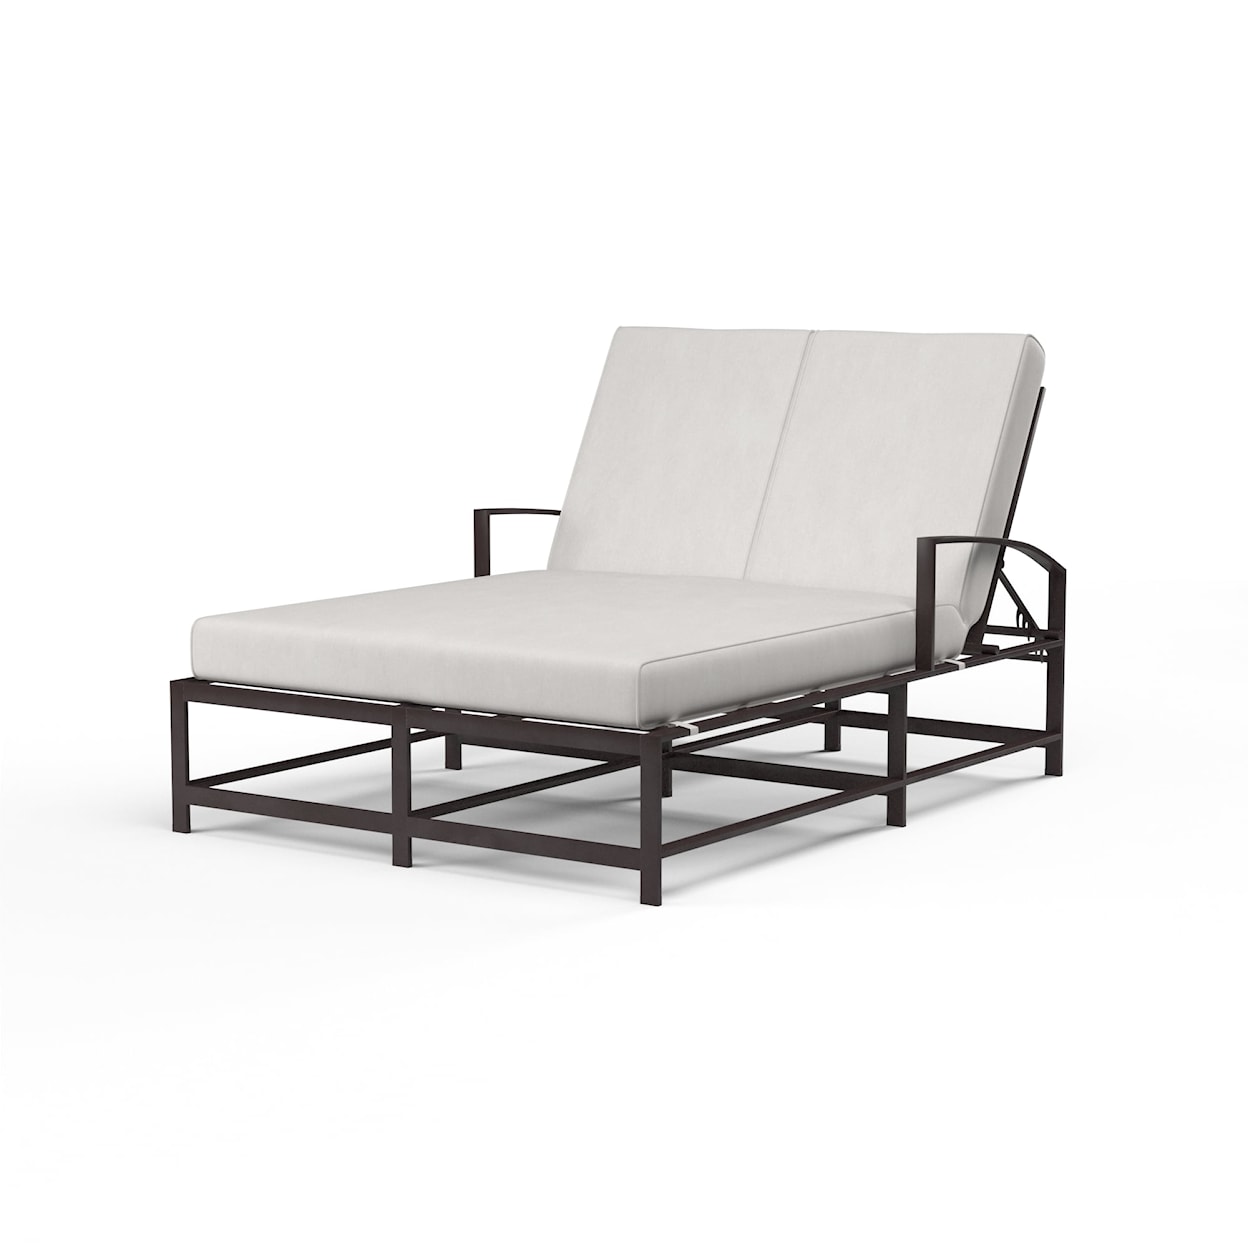 Sunset West La Jolla Upholstered Double Chaise